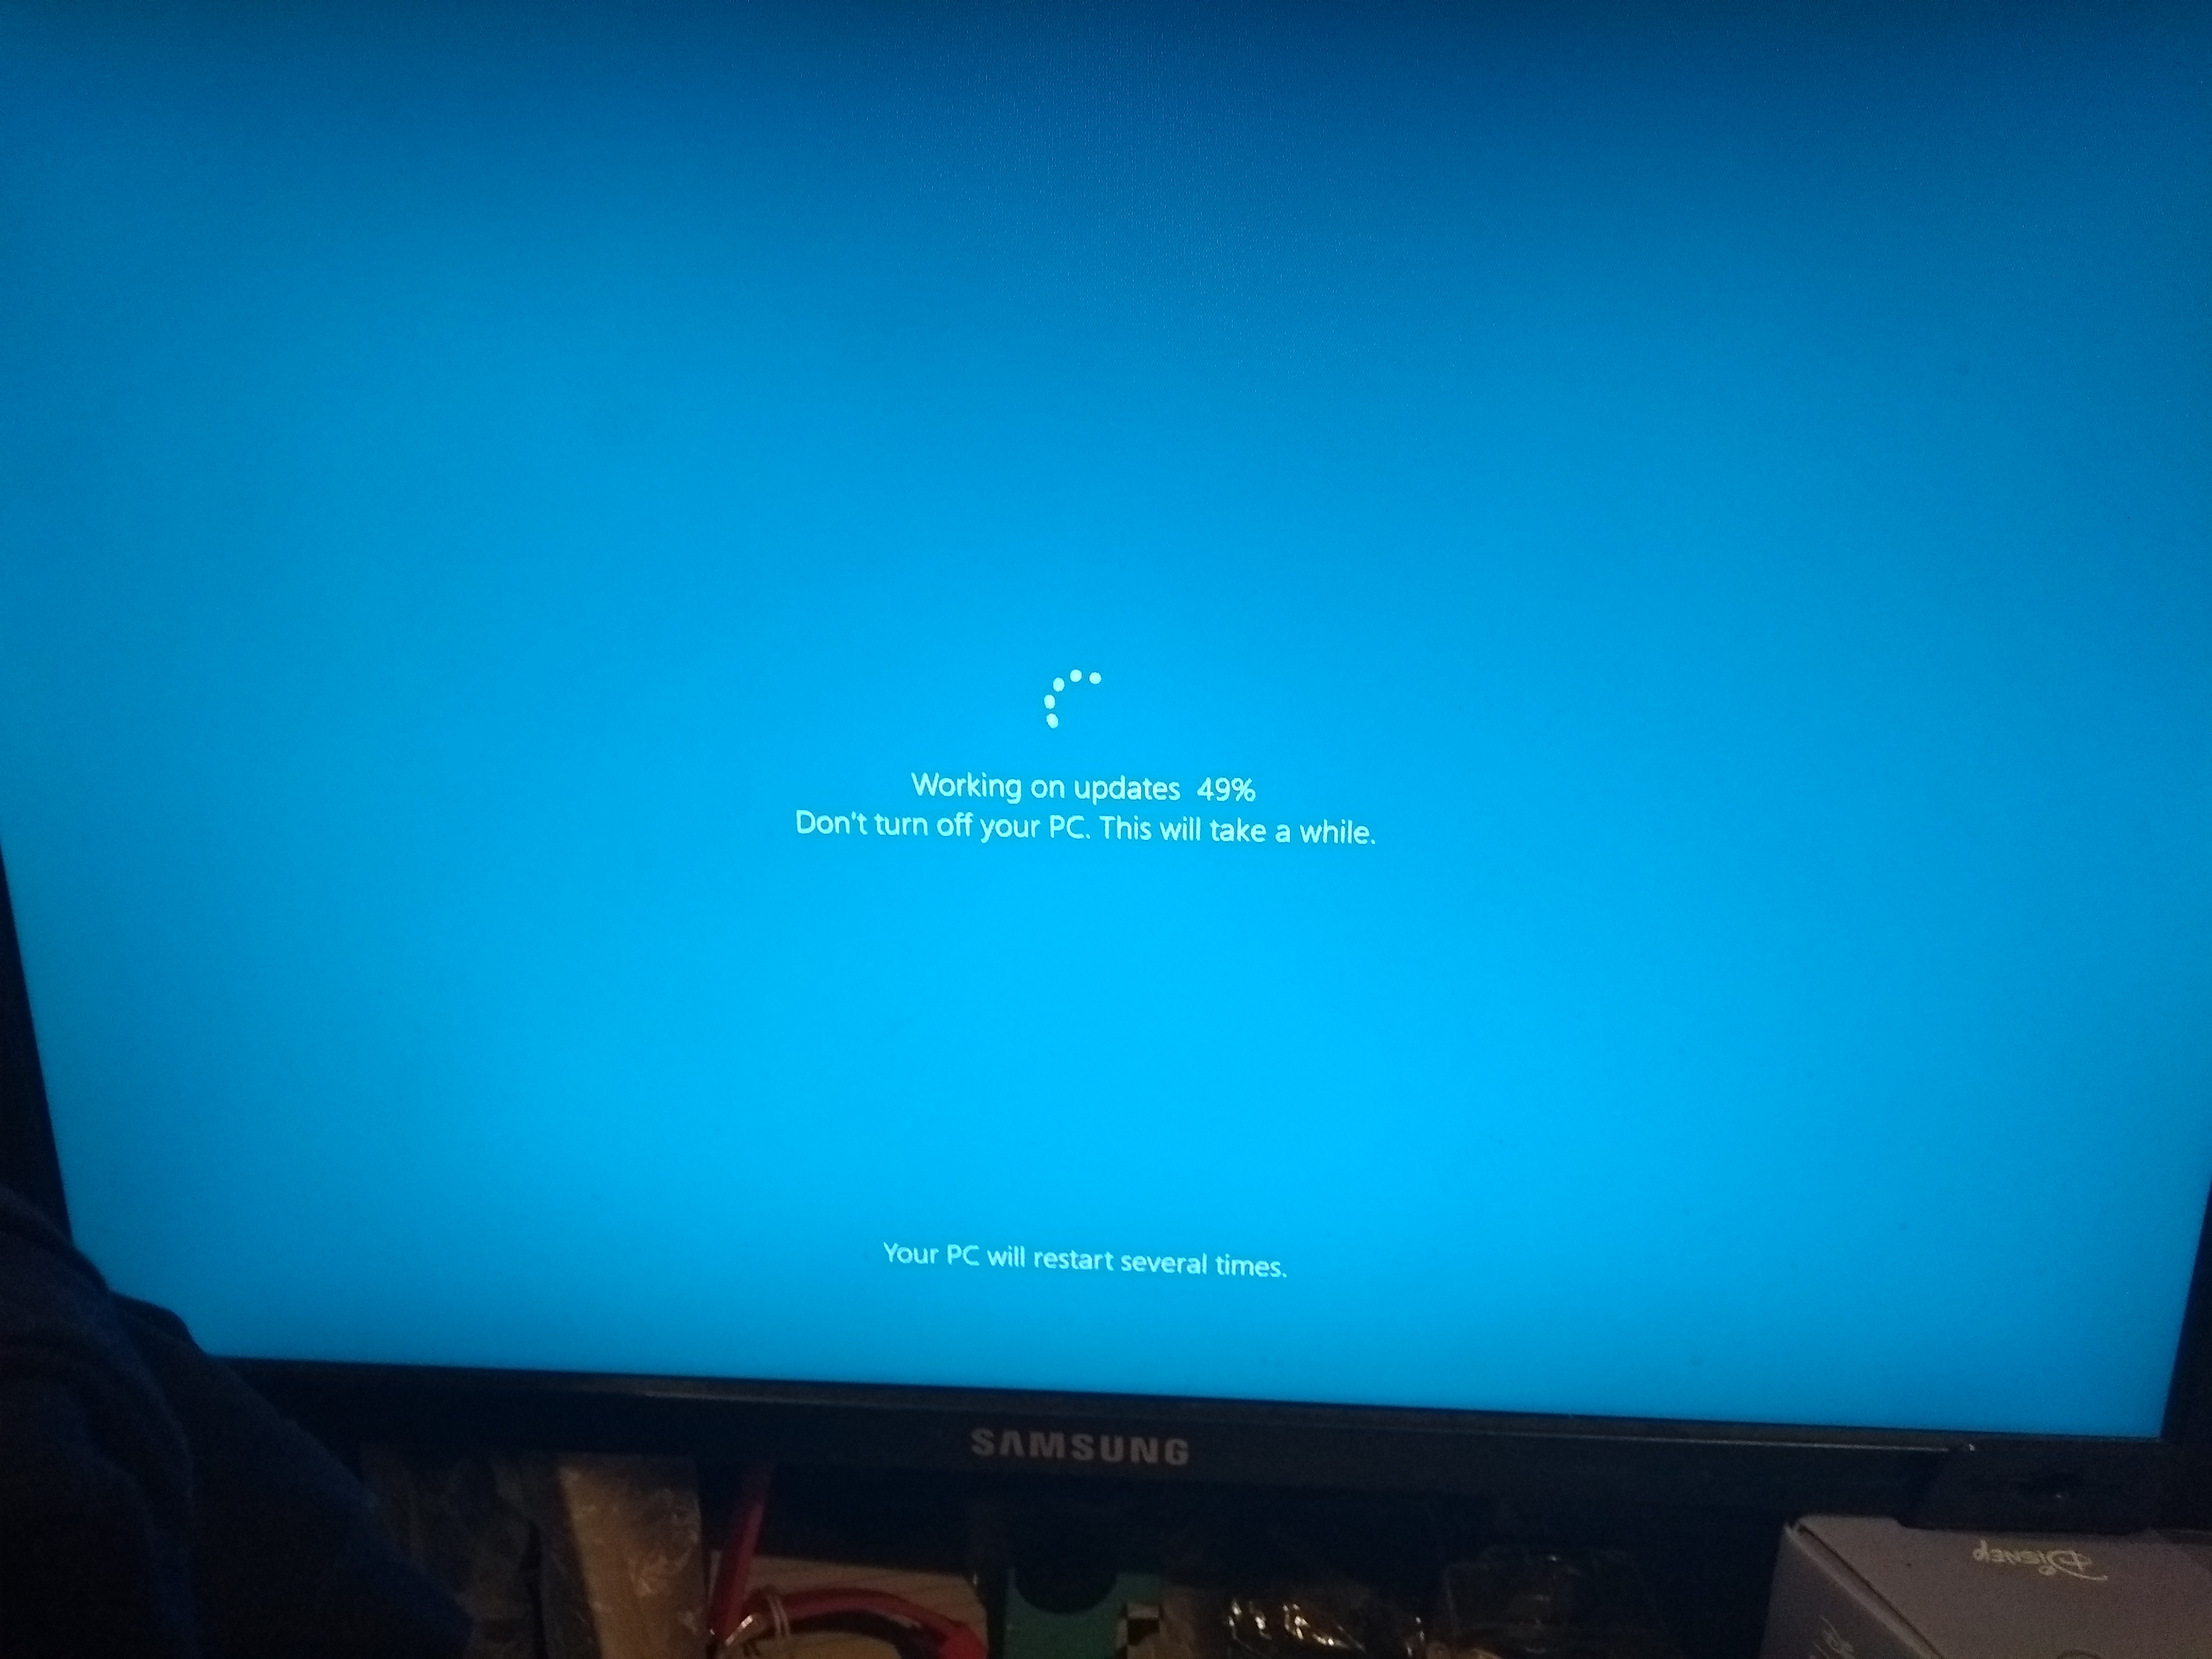 DatModz on X: Woke up, computer was frozen, restarted it and now